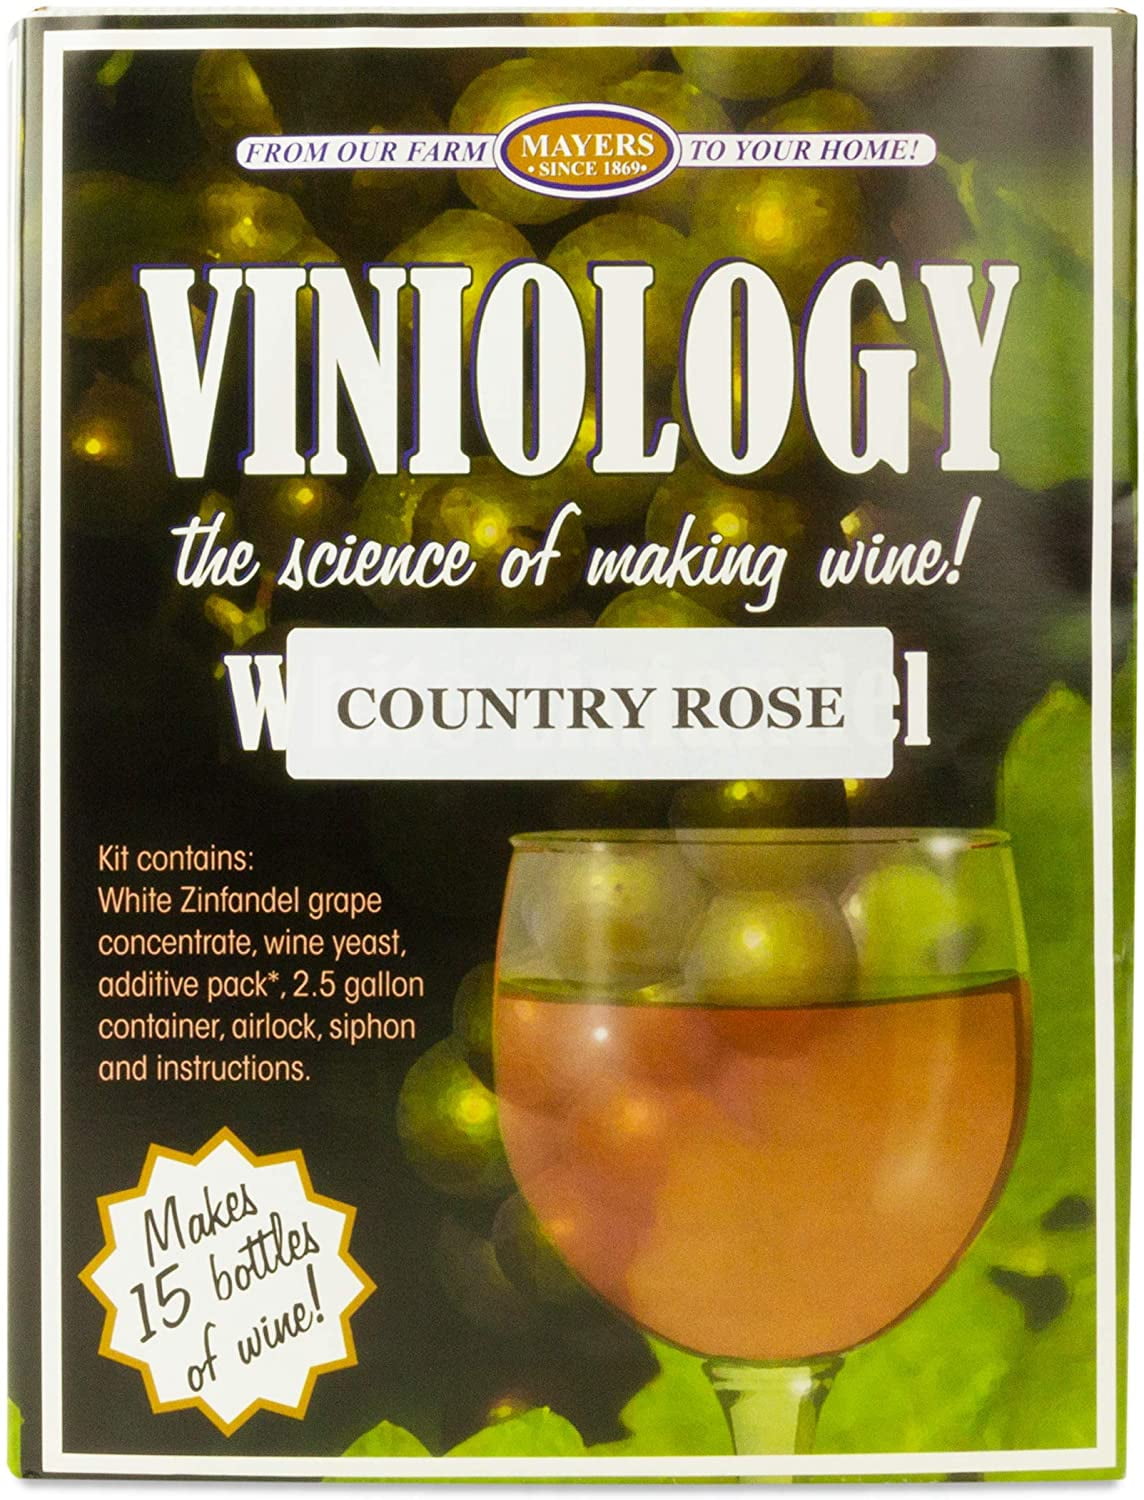 Viniology: The Science of Making Wine Country Rose (White Zinfandel) ｜Makes Up to 12 Bottles of Wine Like a Pro